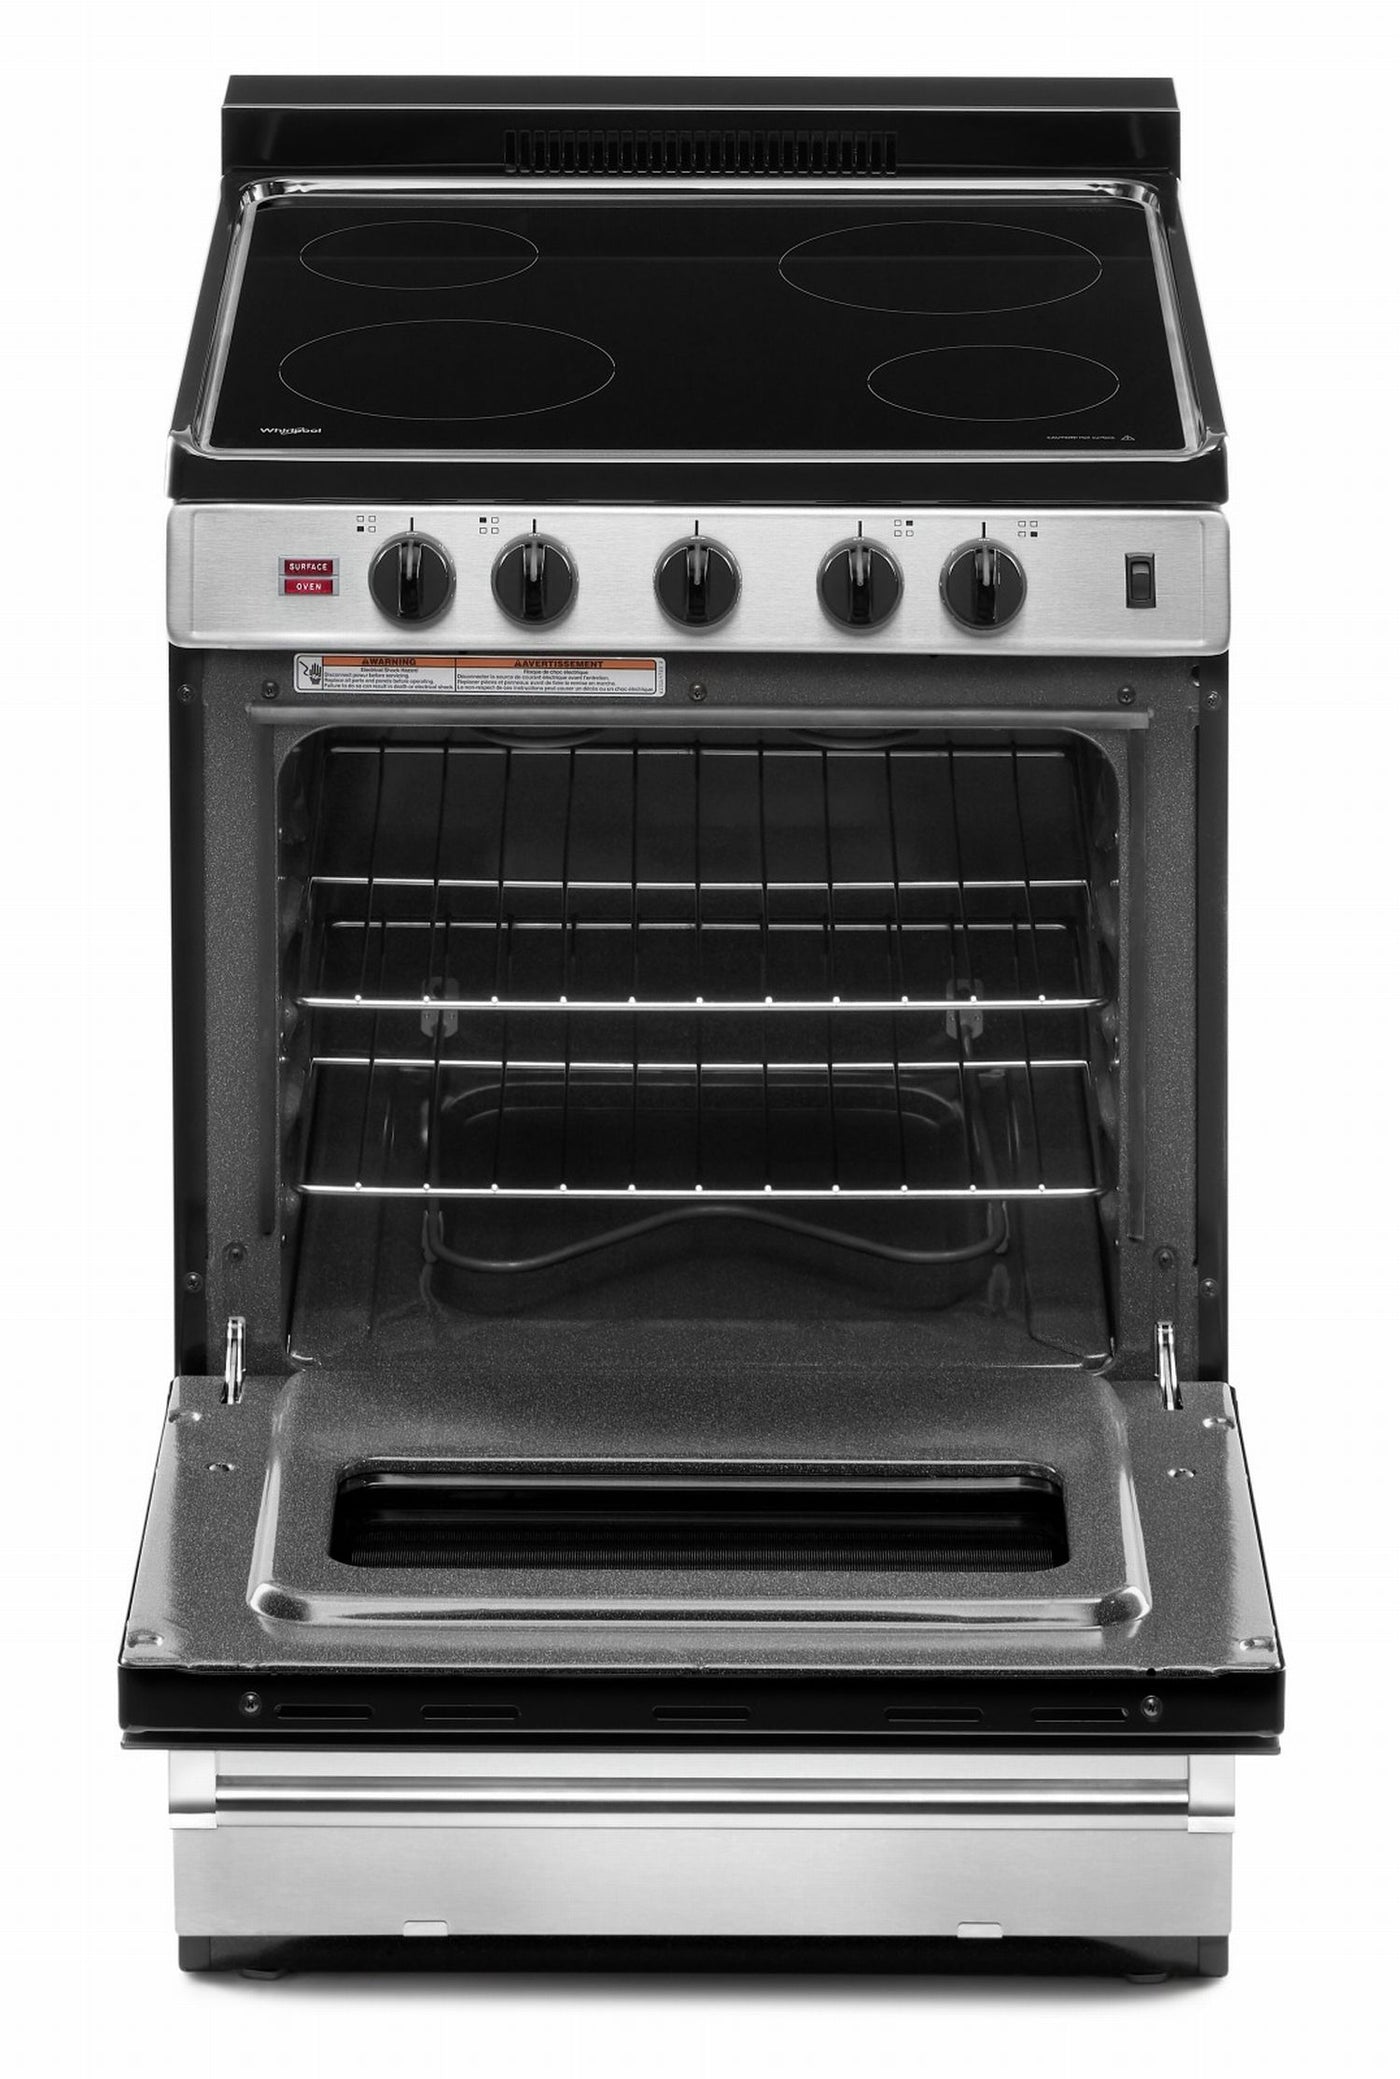 Whirlpool Stainless Steel Freestanding Electric Range (2.96 Cu. Ft.) - YWFE50M4HS